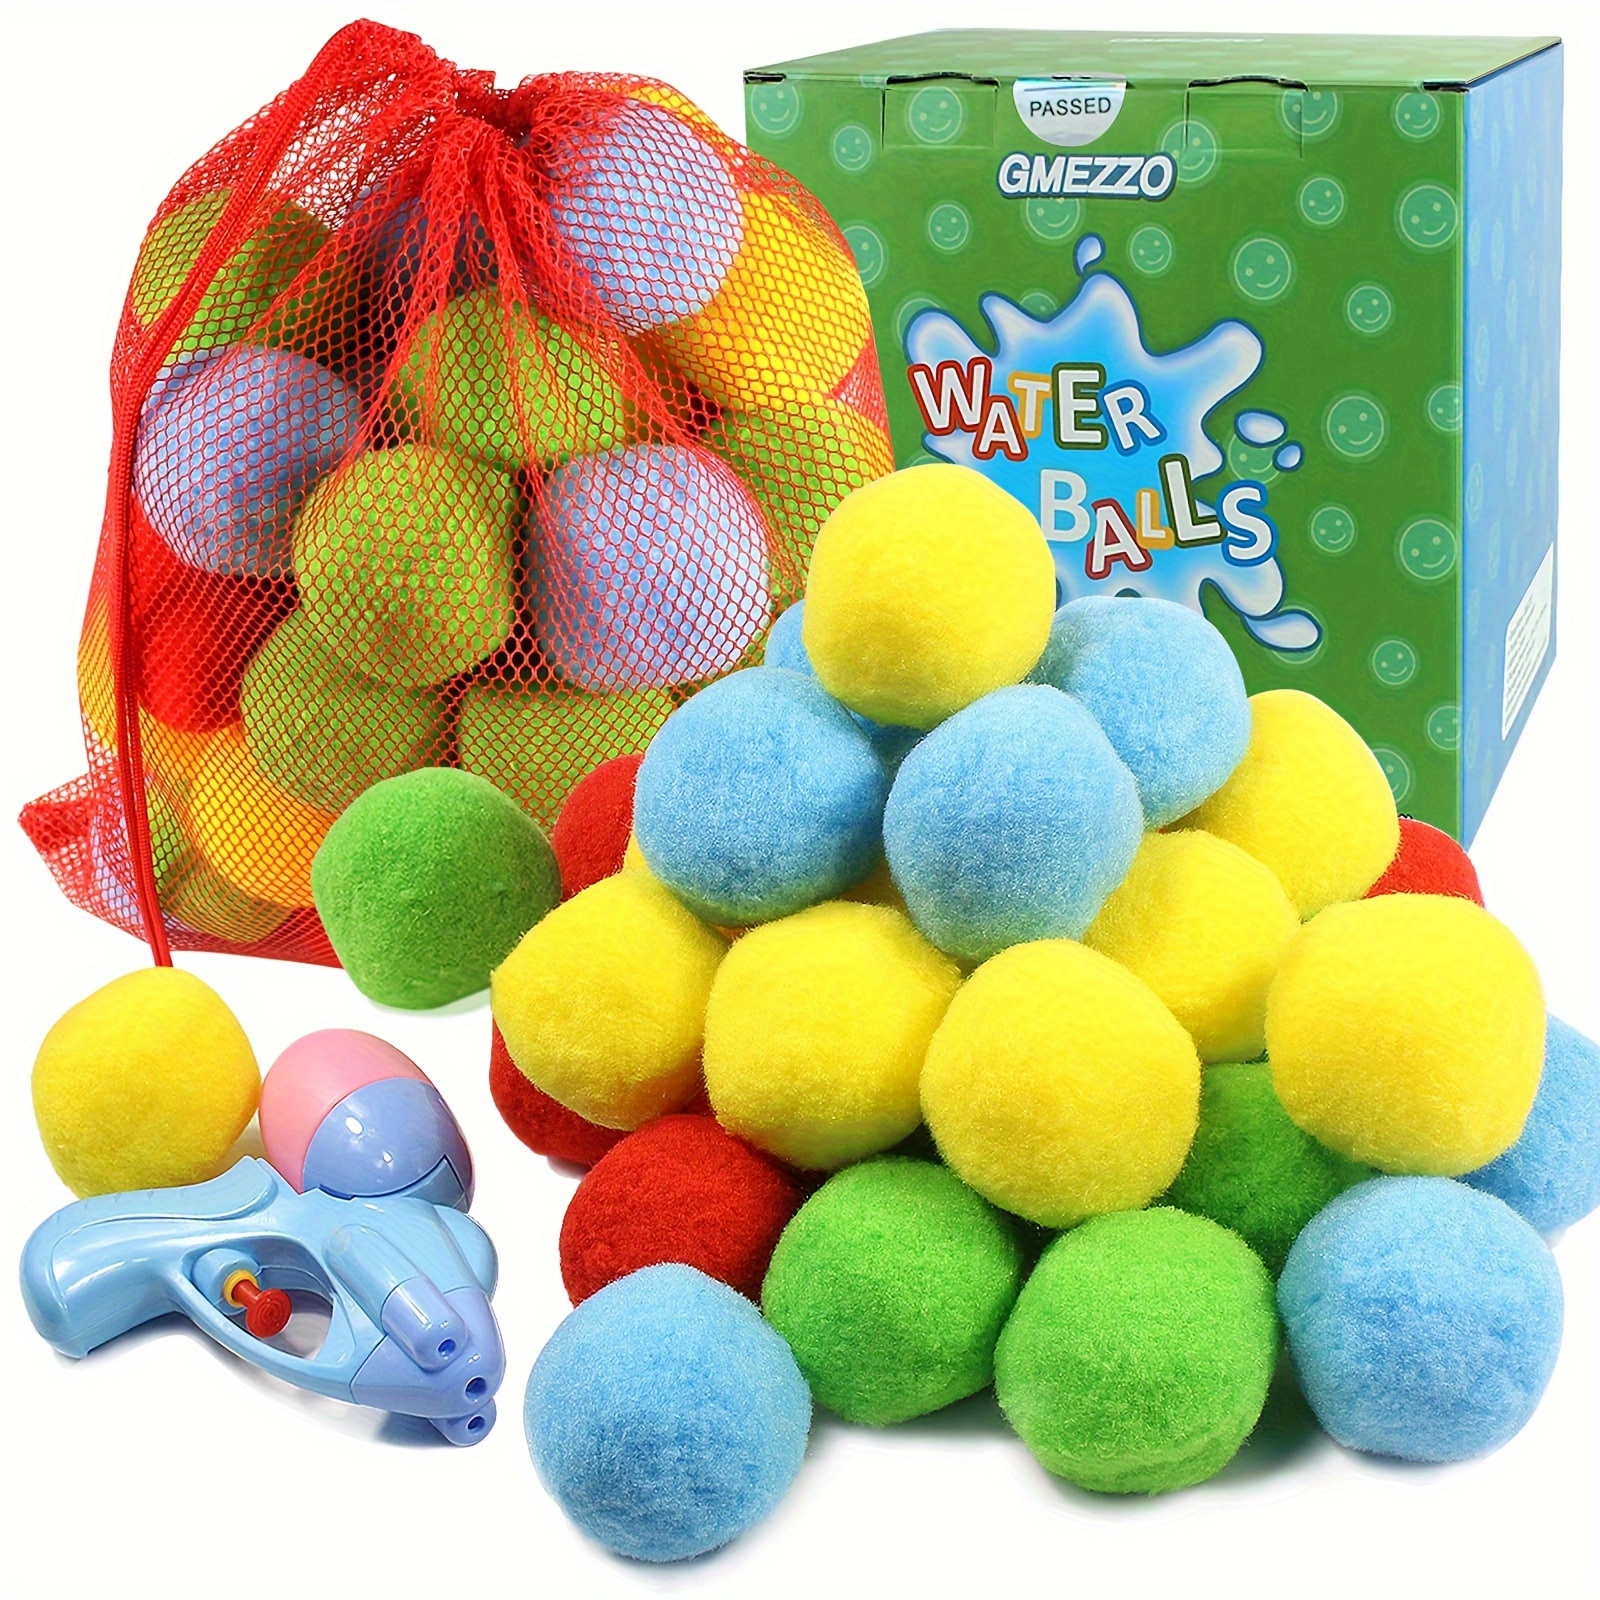 

56 Pcs Water Soaker Balls Reusable Water Balloons 2.5" Highly Absorbent Quick Rebound Soft Cotton Water Balls For Kids And Teens Boys And Girls Summer Outdoor Play Pool Party Backyard